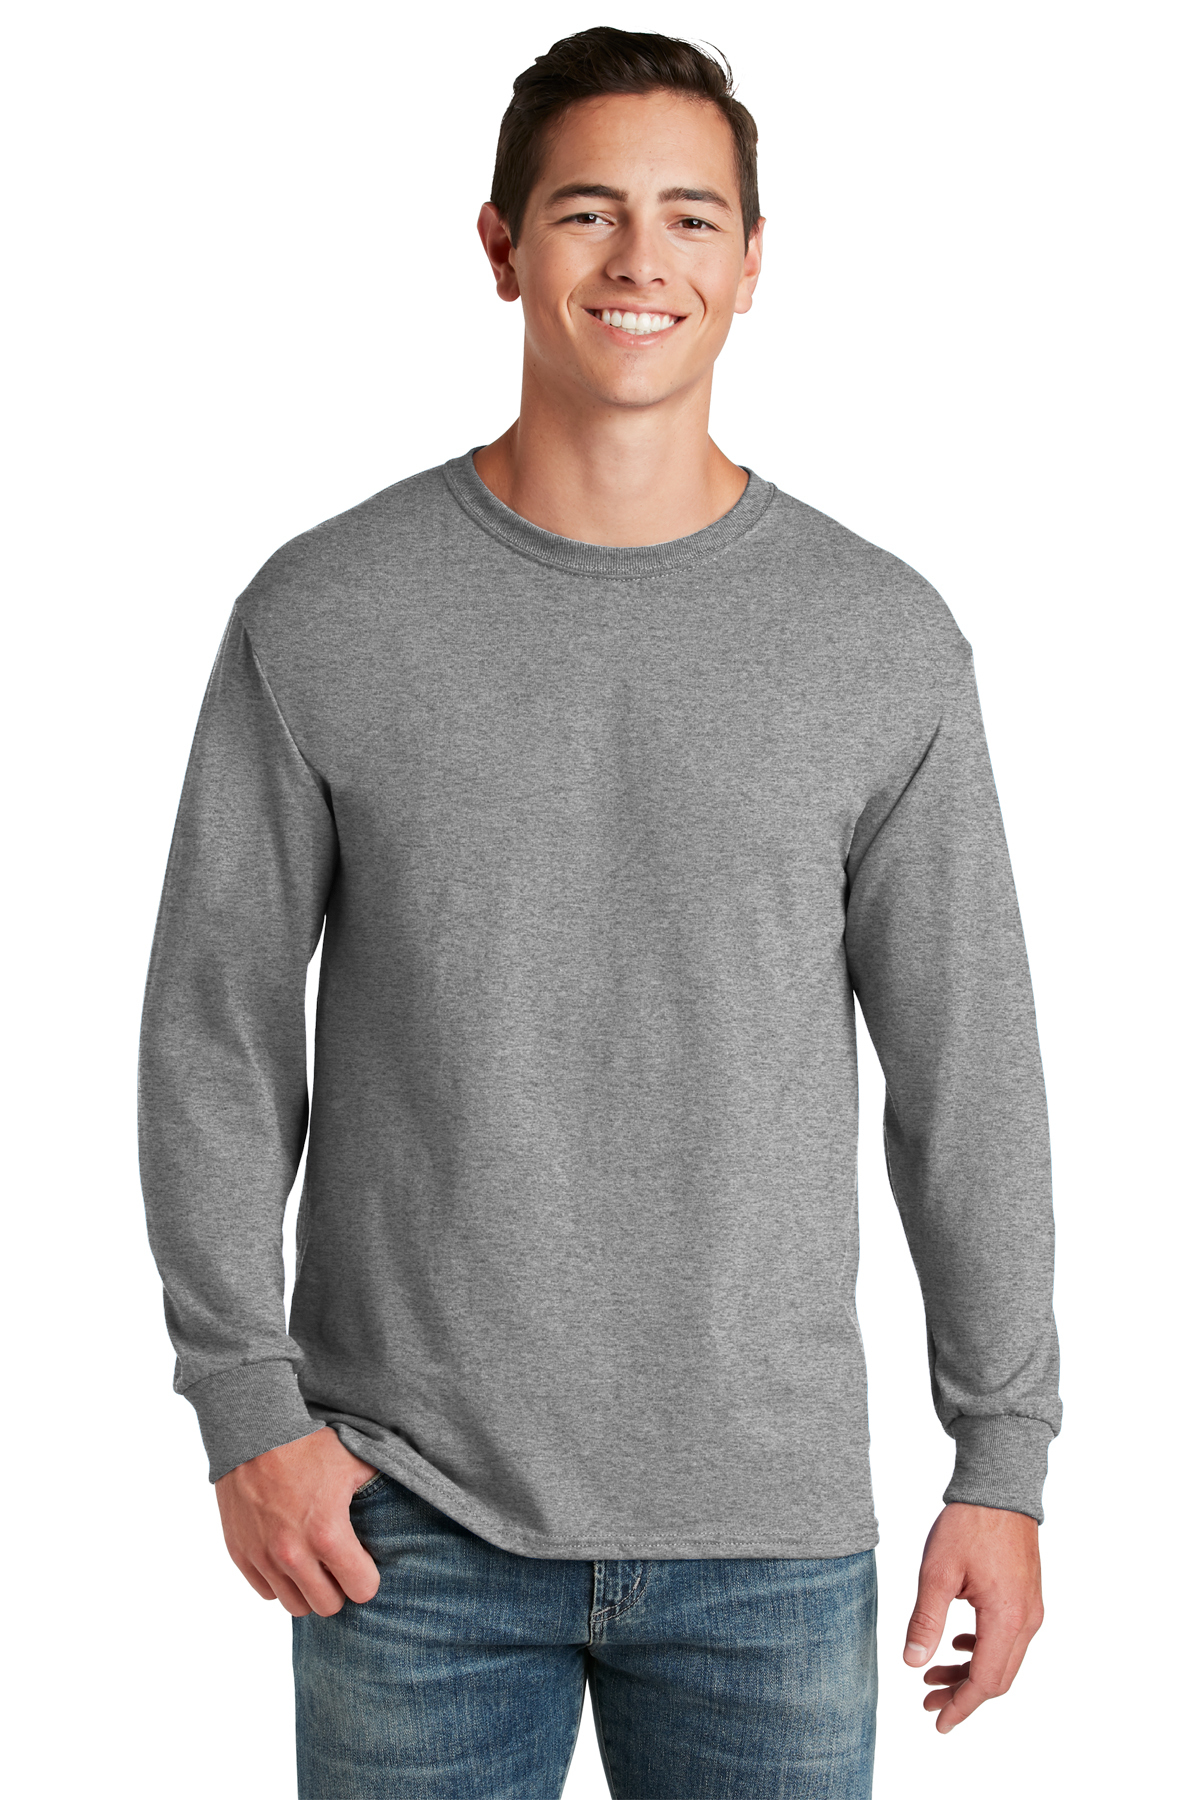 Men's Black Label Edition Double Long Sleeve T-Shirt in Optic